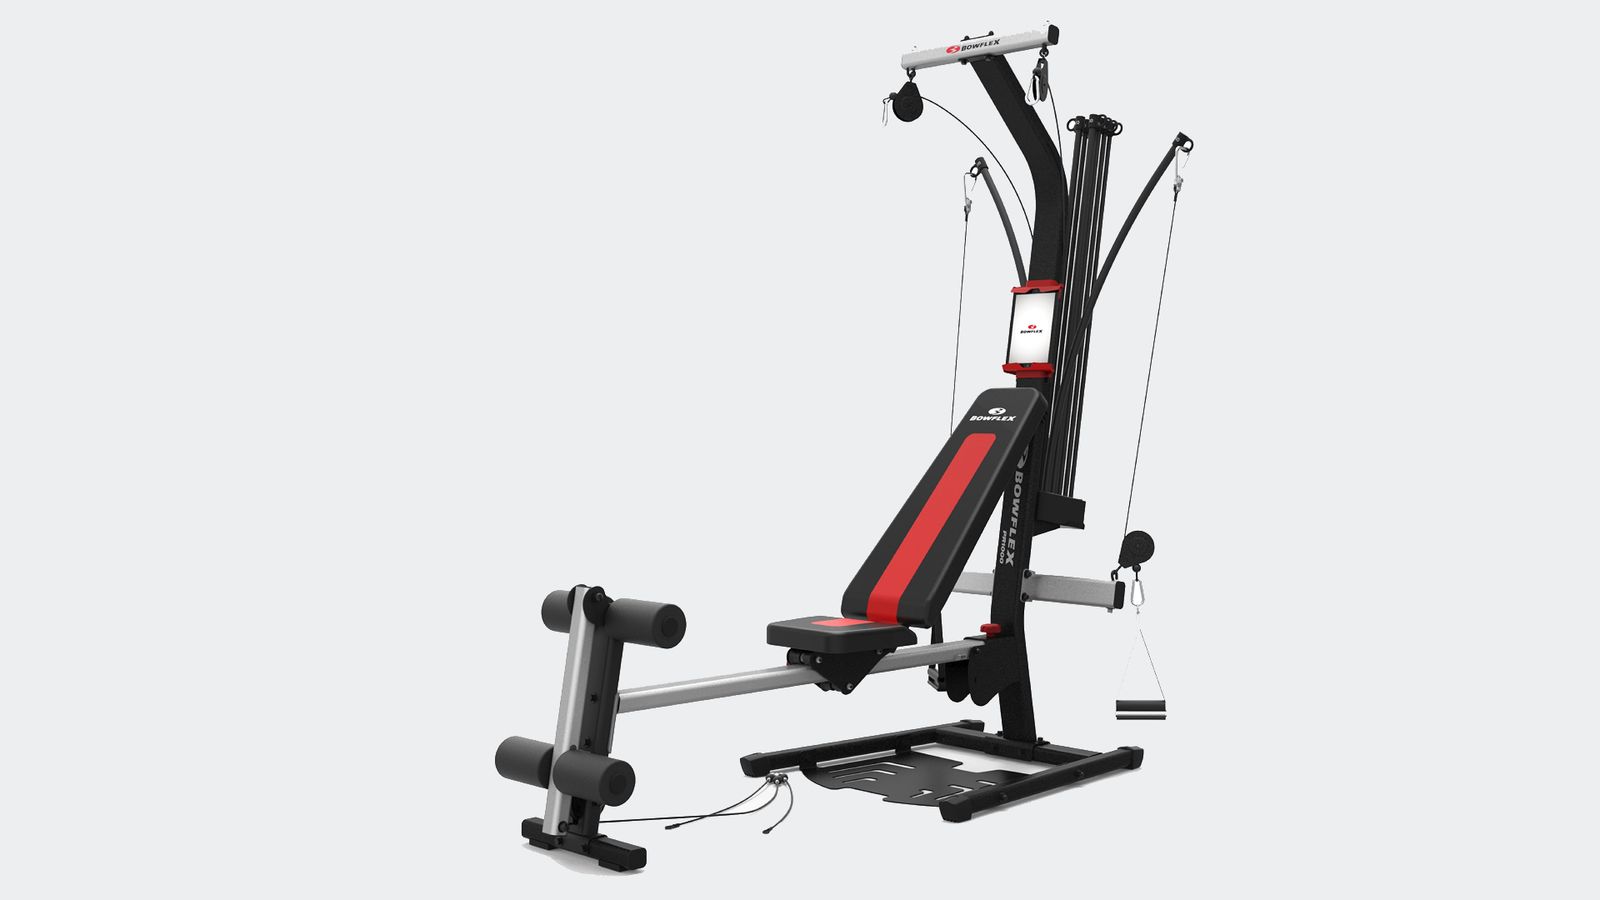 Bowflex PR1000 product image of a black and red multi gym with multiple cables.